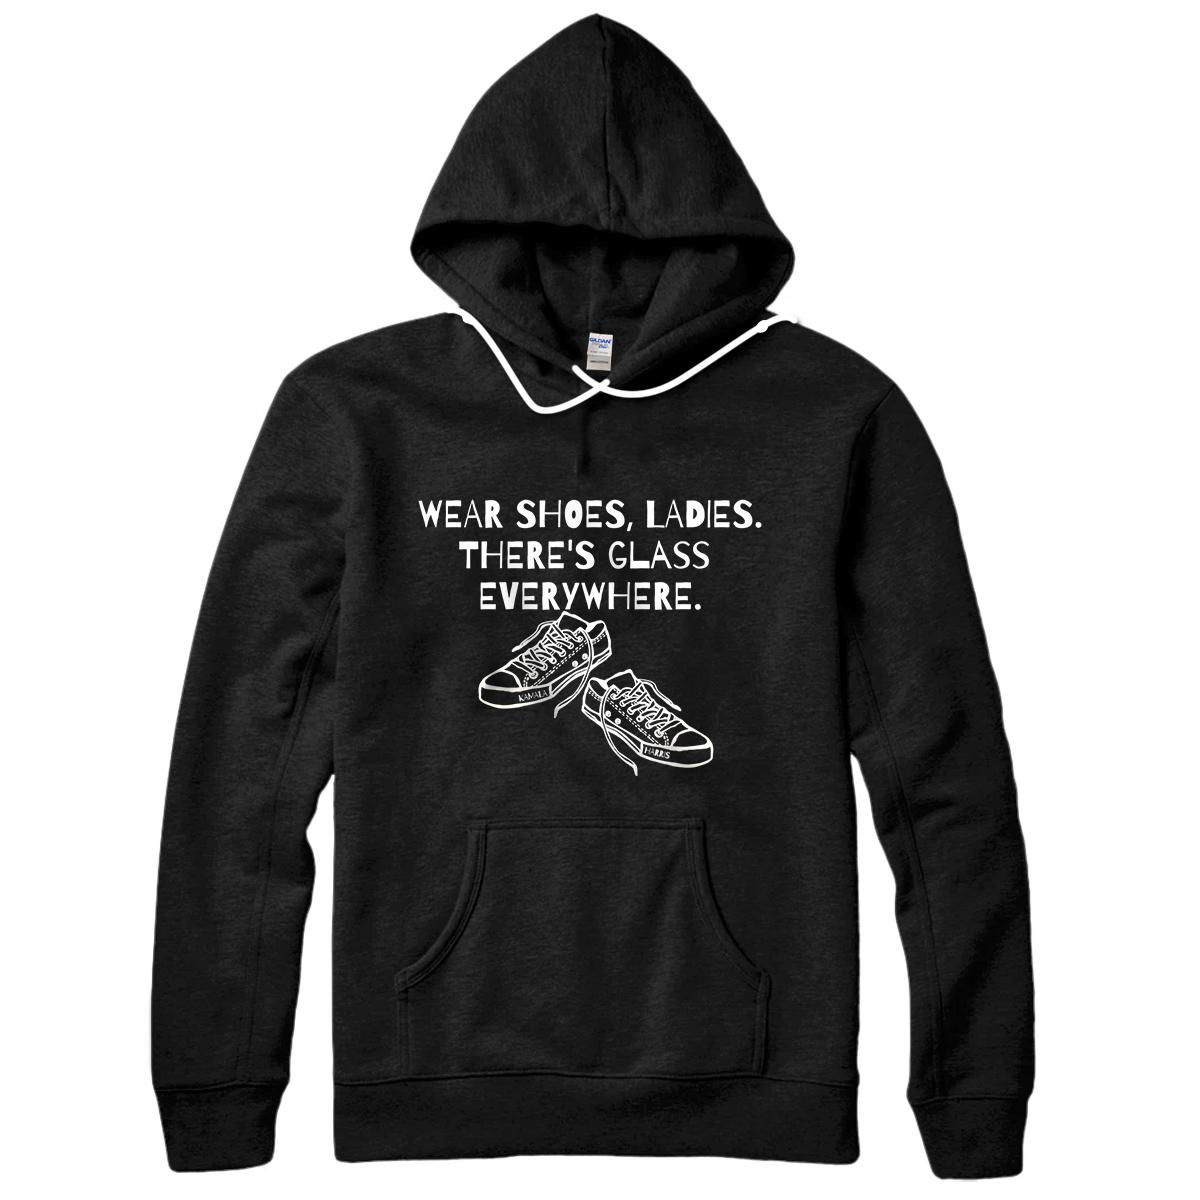 Personalized Wear Shoes Ladies, There's Glass Everywhere statement Pullover Hoodie